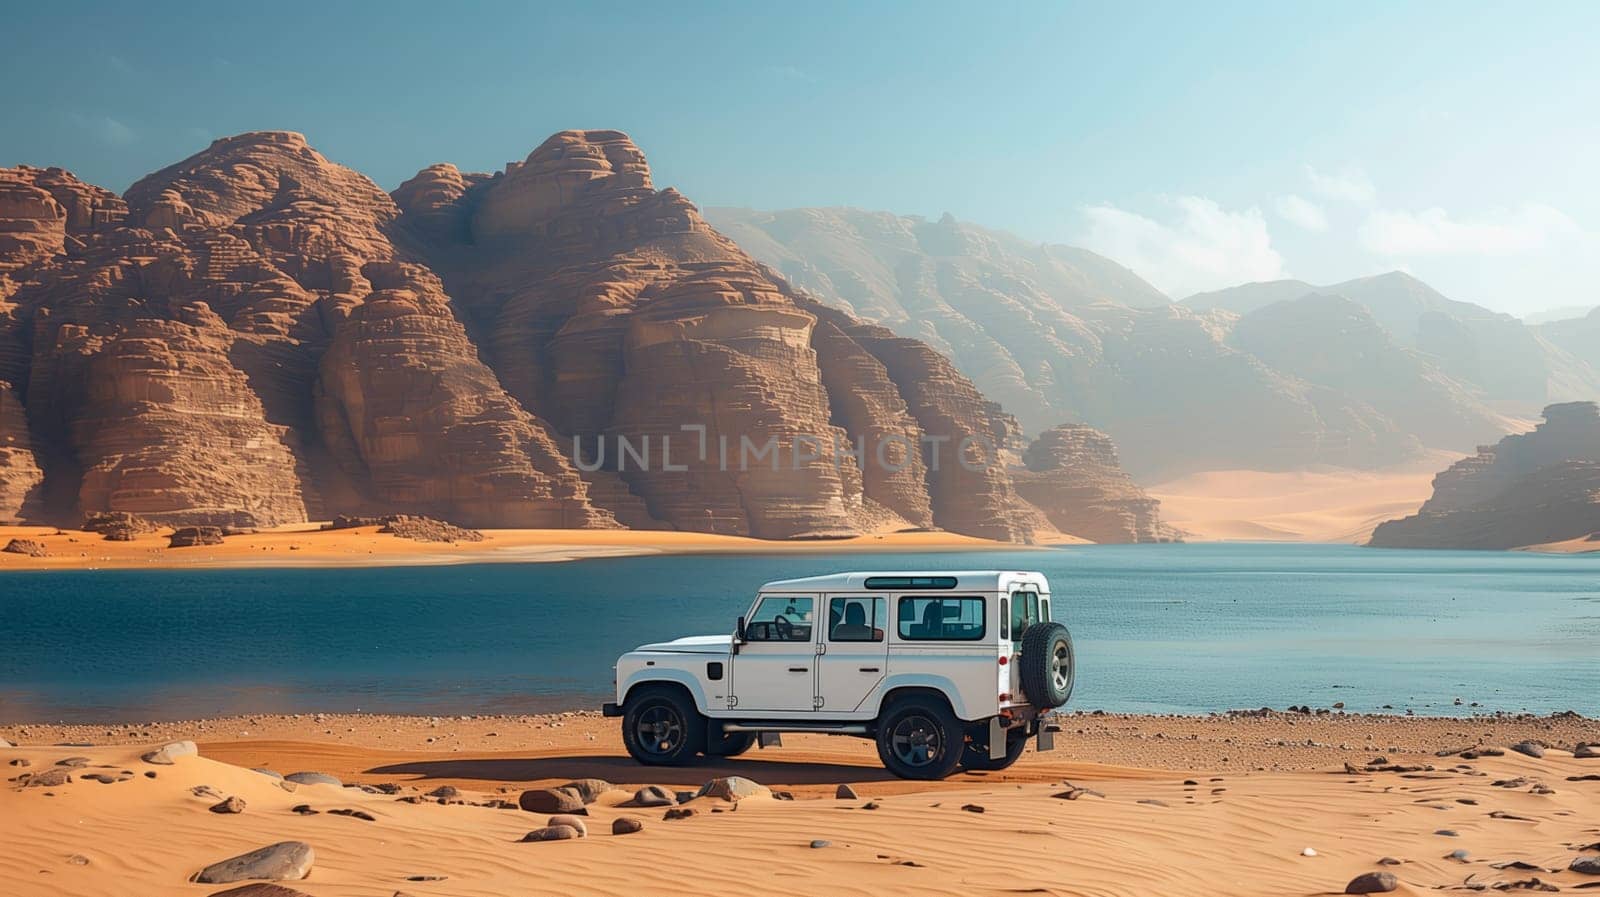 A white jeep is parked on the sandy beach next to the calm lake, with majestic mountains in the background under the clear blue sky